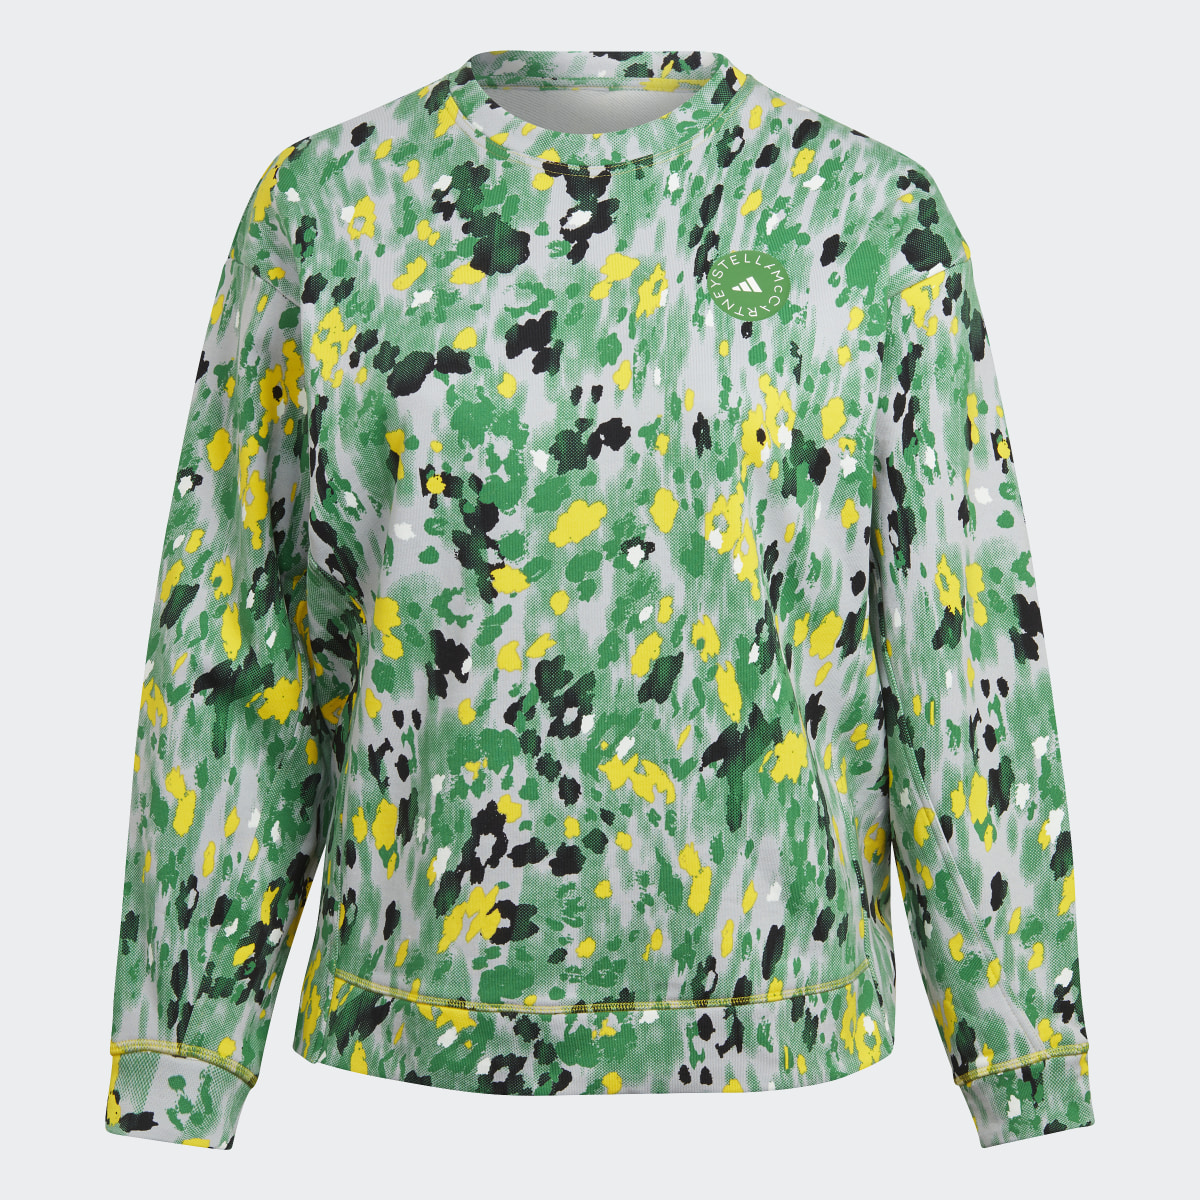 Adidas Sweat-shirt graphique adidas by Stella McCartney (Grandes tailles). 6